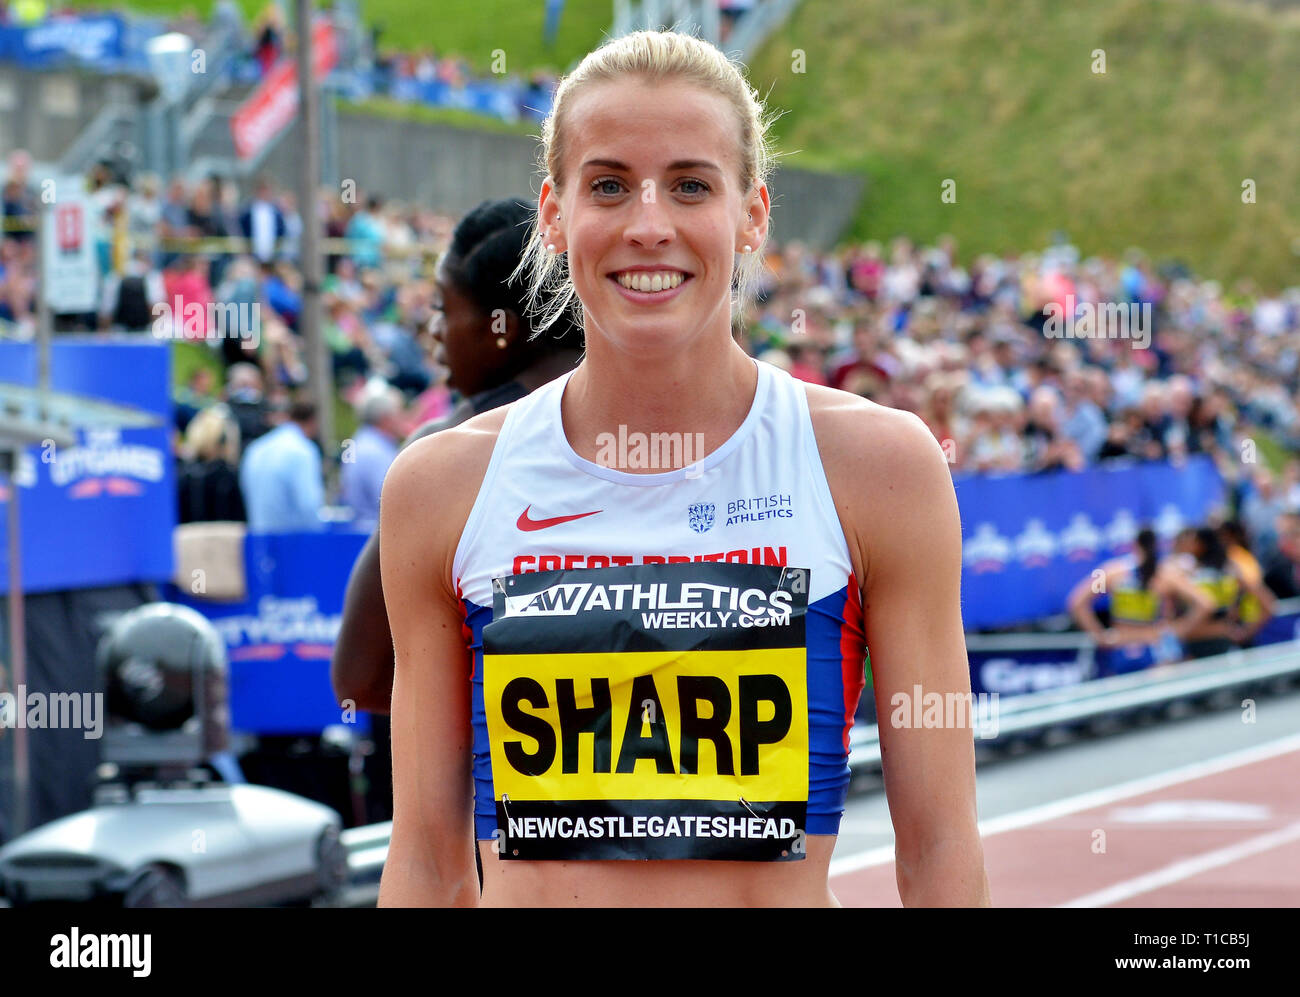 Lyndsey Sharp 800 meters runner competing at the Great North City Games - British Athletics Stock Photo